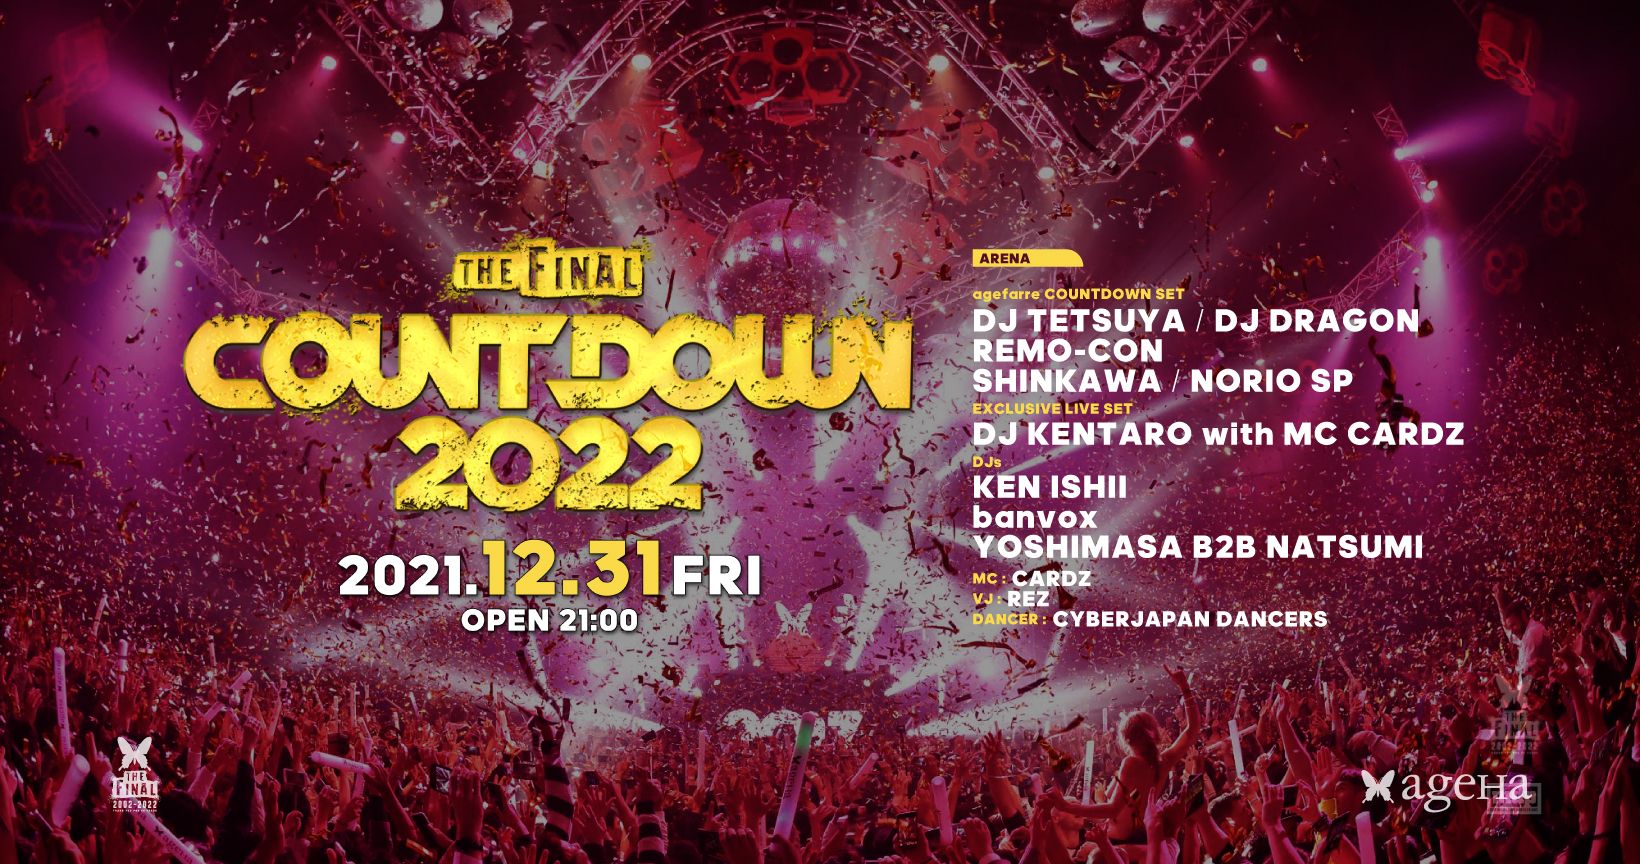 ageHa COUNTDOWN to 2022 "The Final"